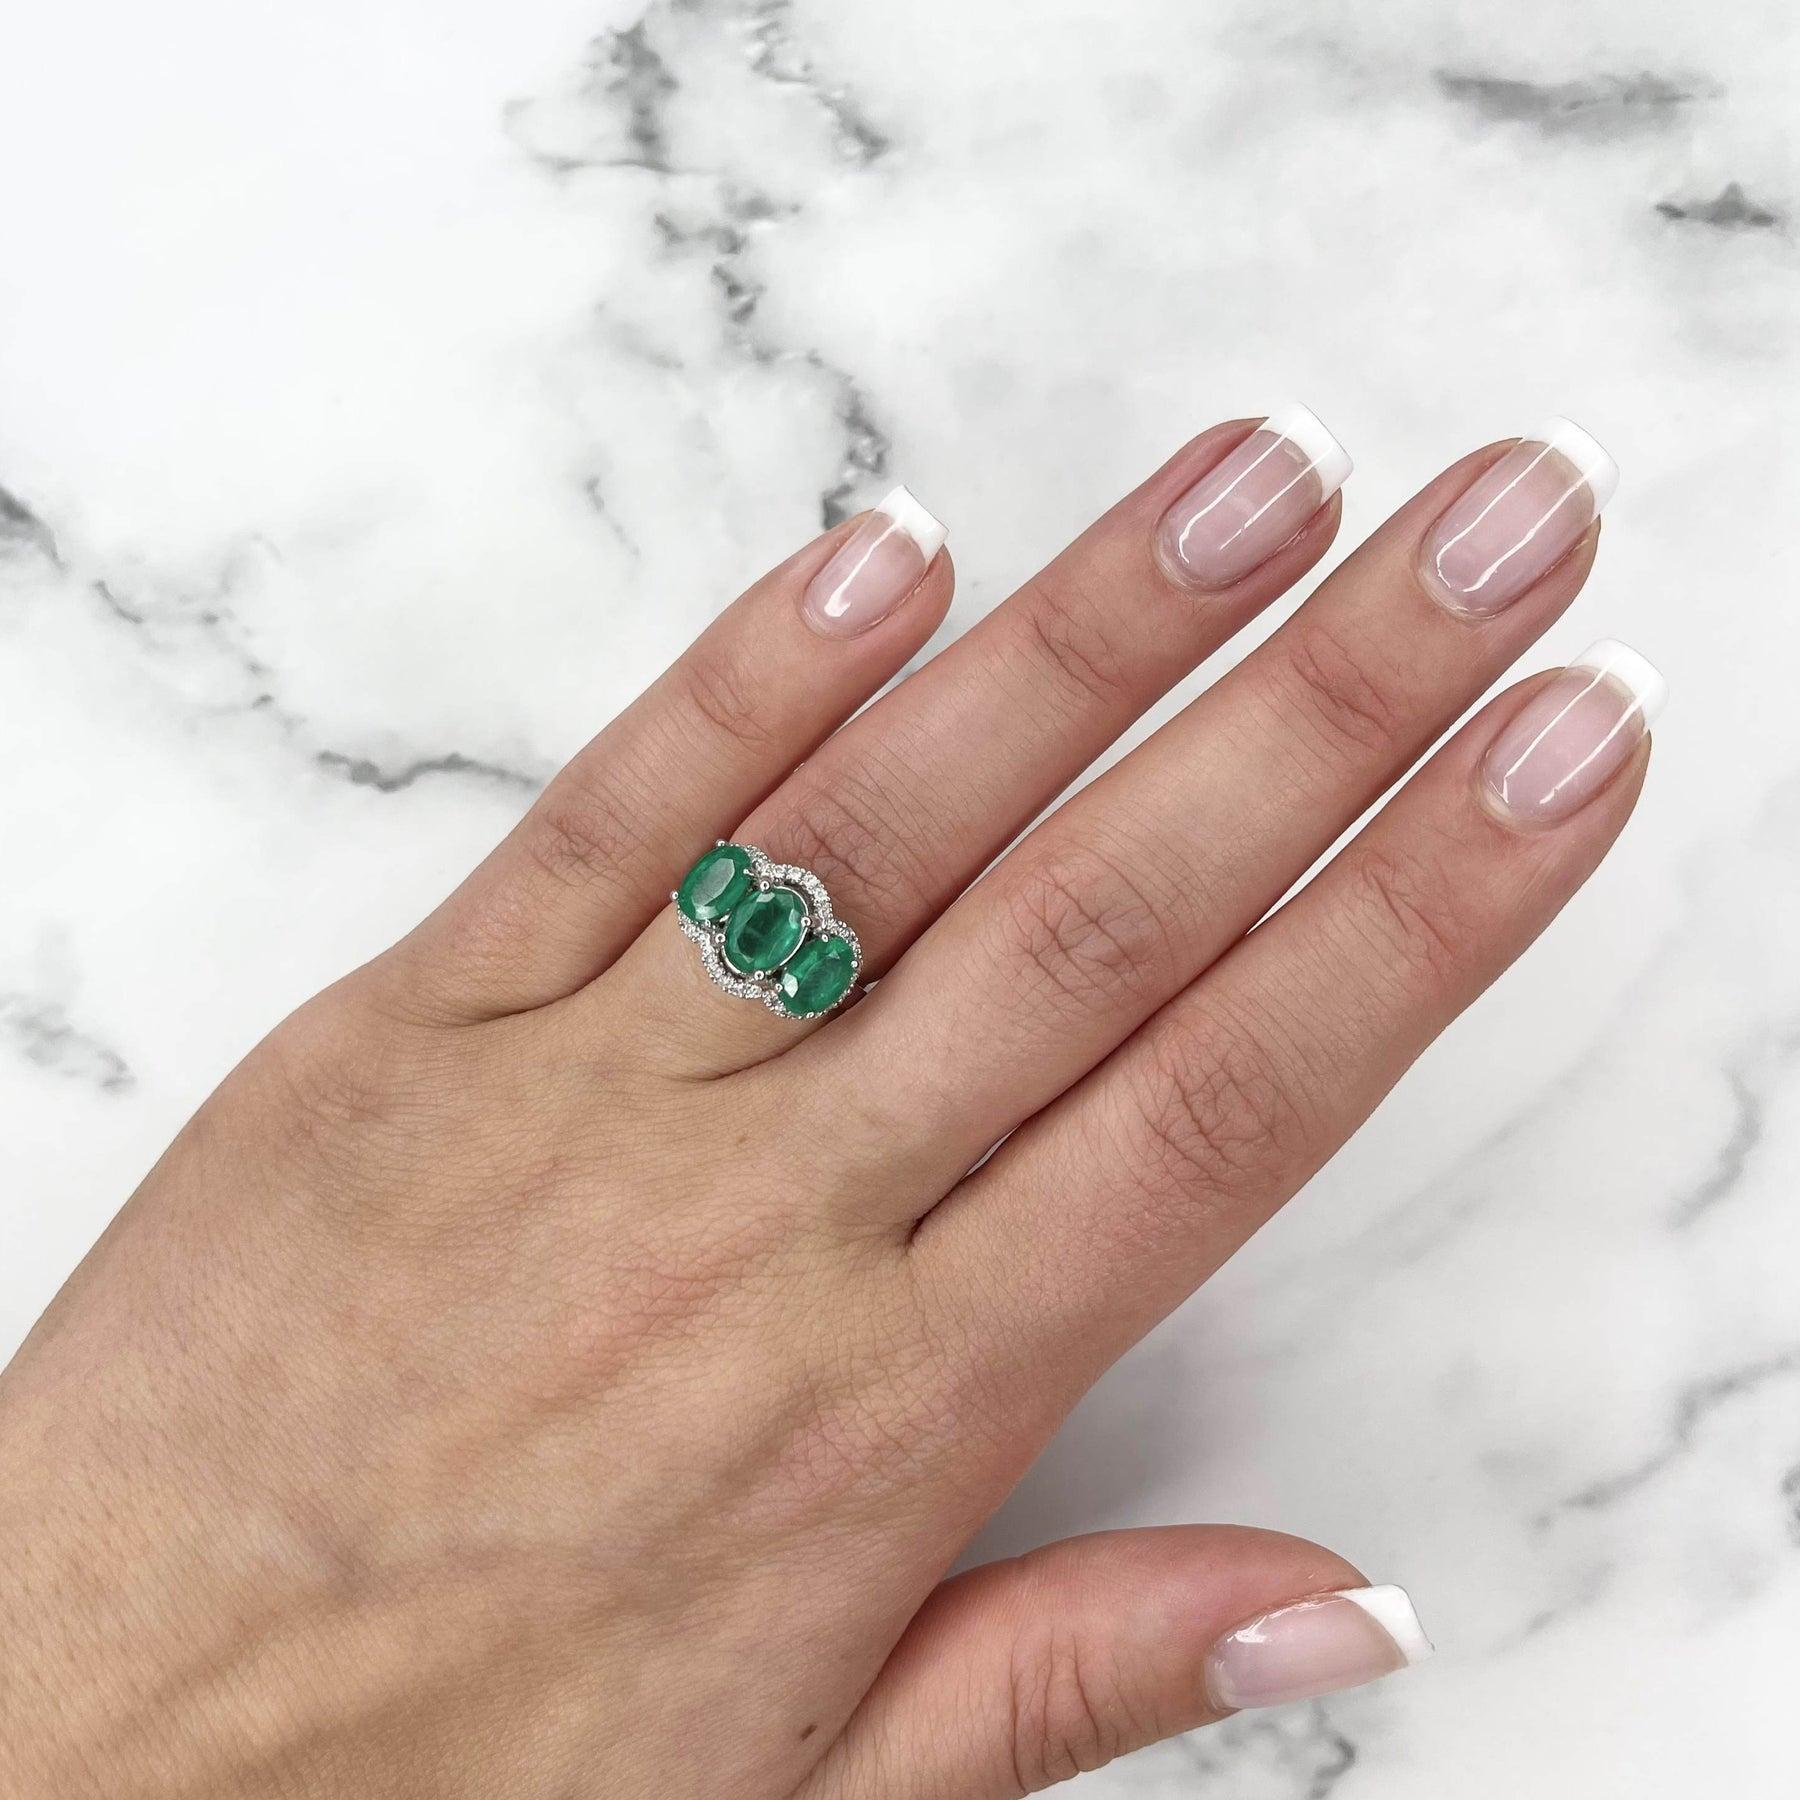 For Sale:  18ct White Gold Trilogy Emerald and Diamond Ring 5